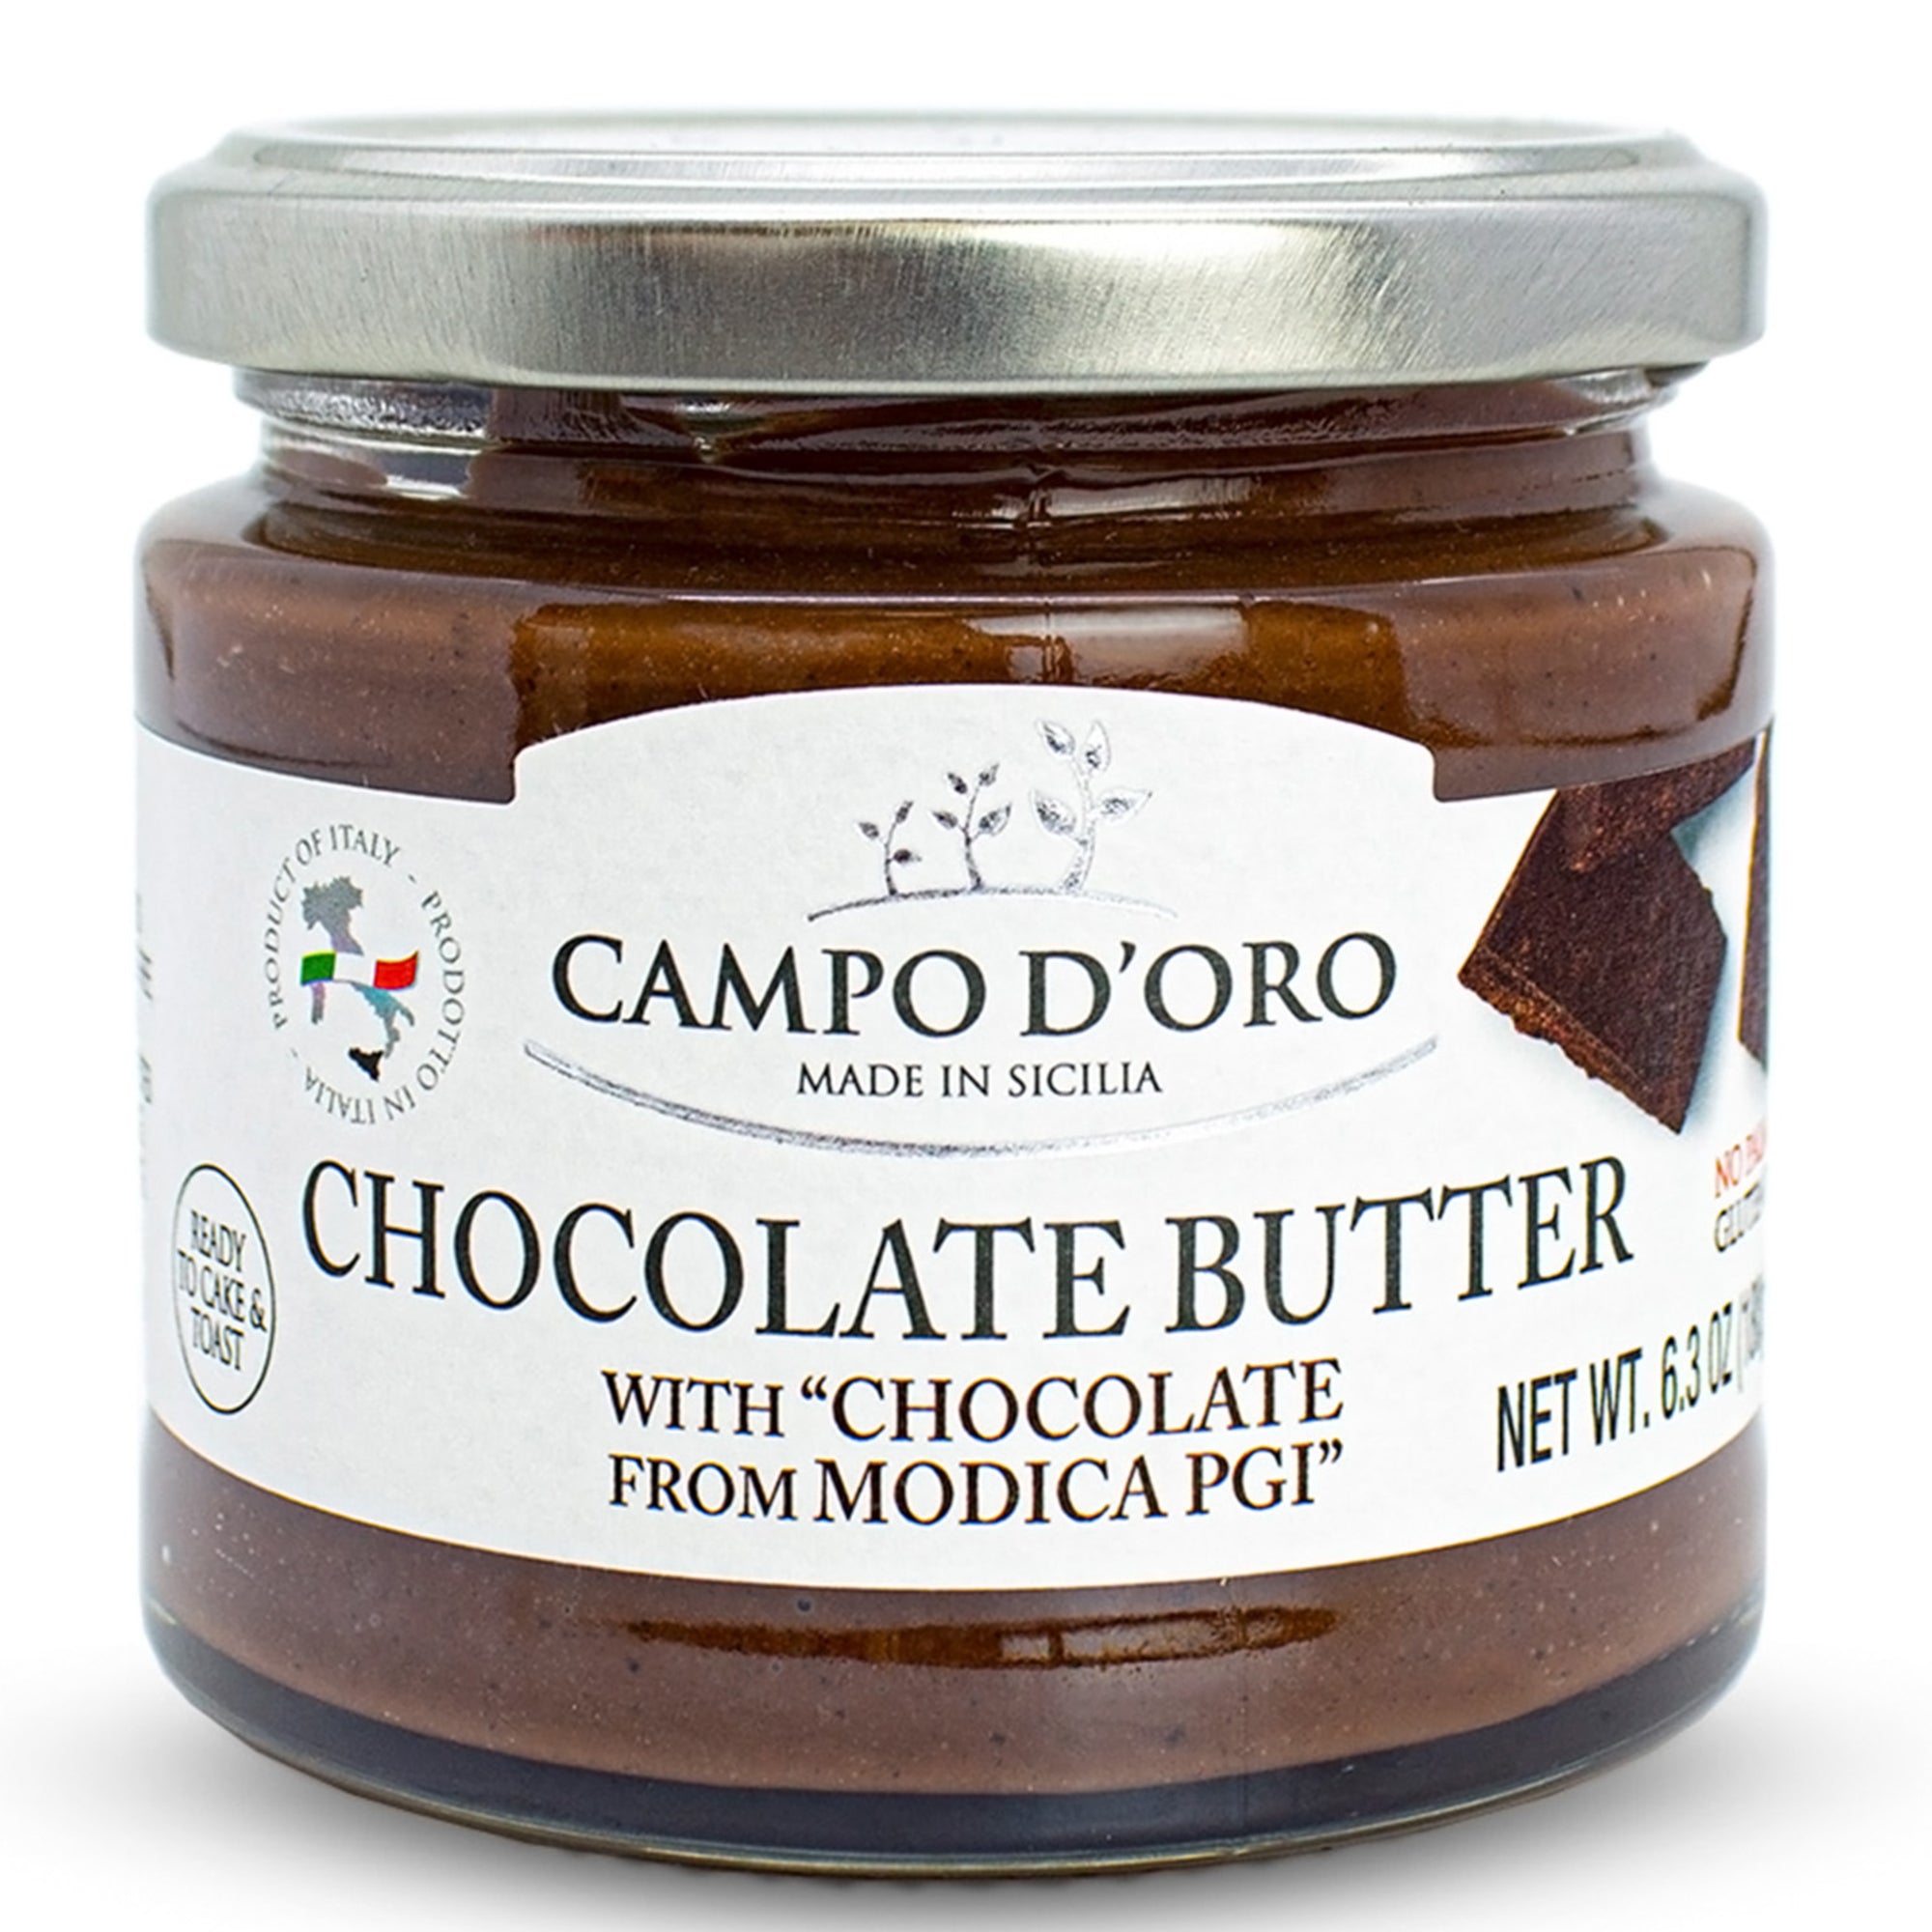 Premium Chocolate Spread, DOP Certified Modica Chocolate, Creamy, Buttery, No Palm Oil, from Sicily, Italy, 6.35oz, Campo D'Oro